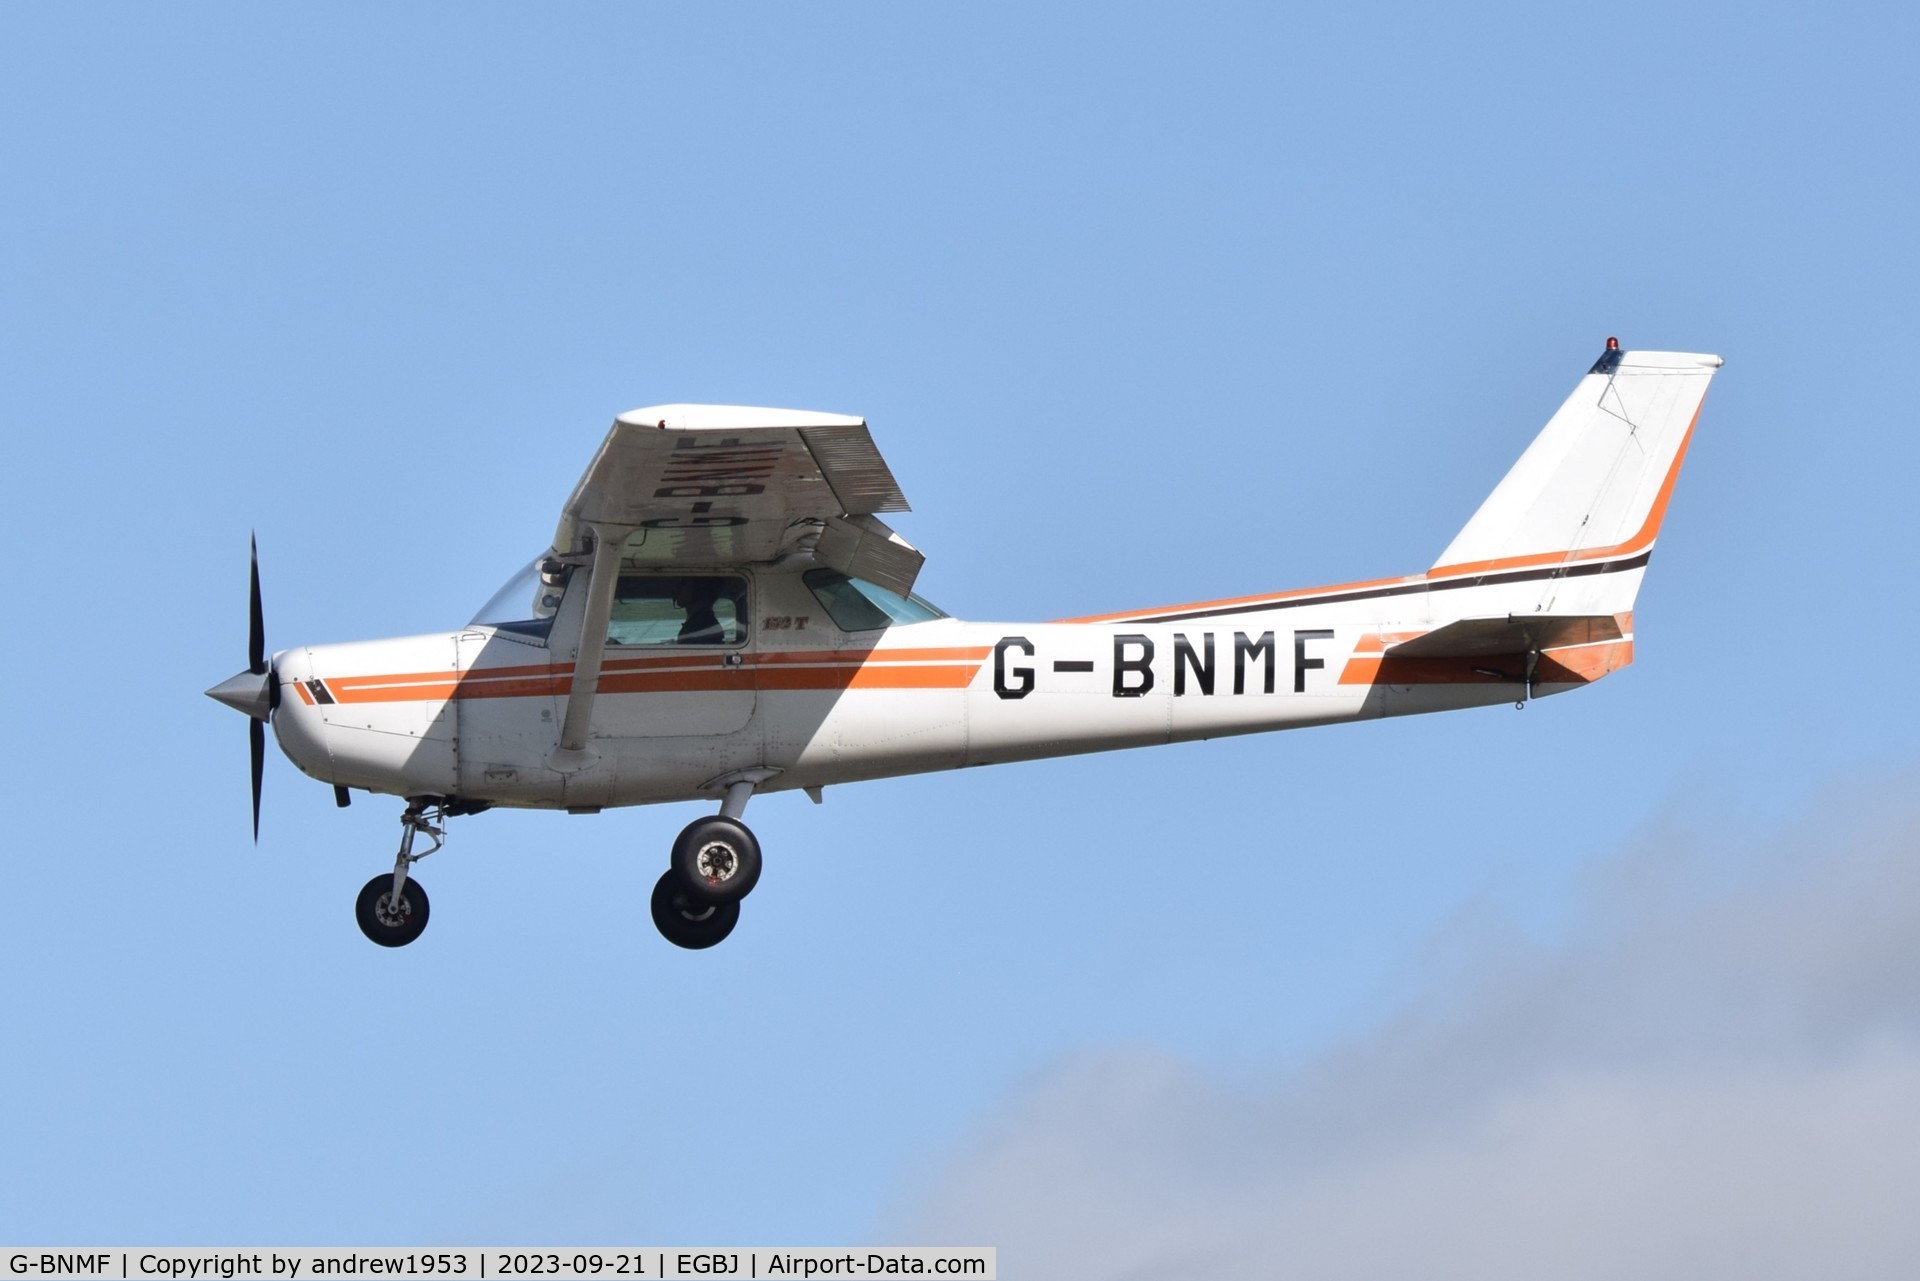 G-BNMF, 1982 Cessna 152 C/N 152-85563, G-BNMF at Gloucestershire Airport.